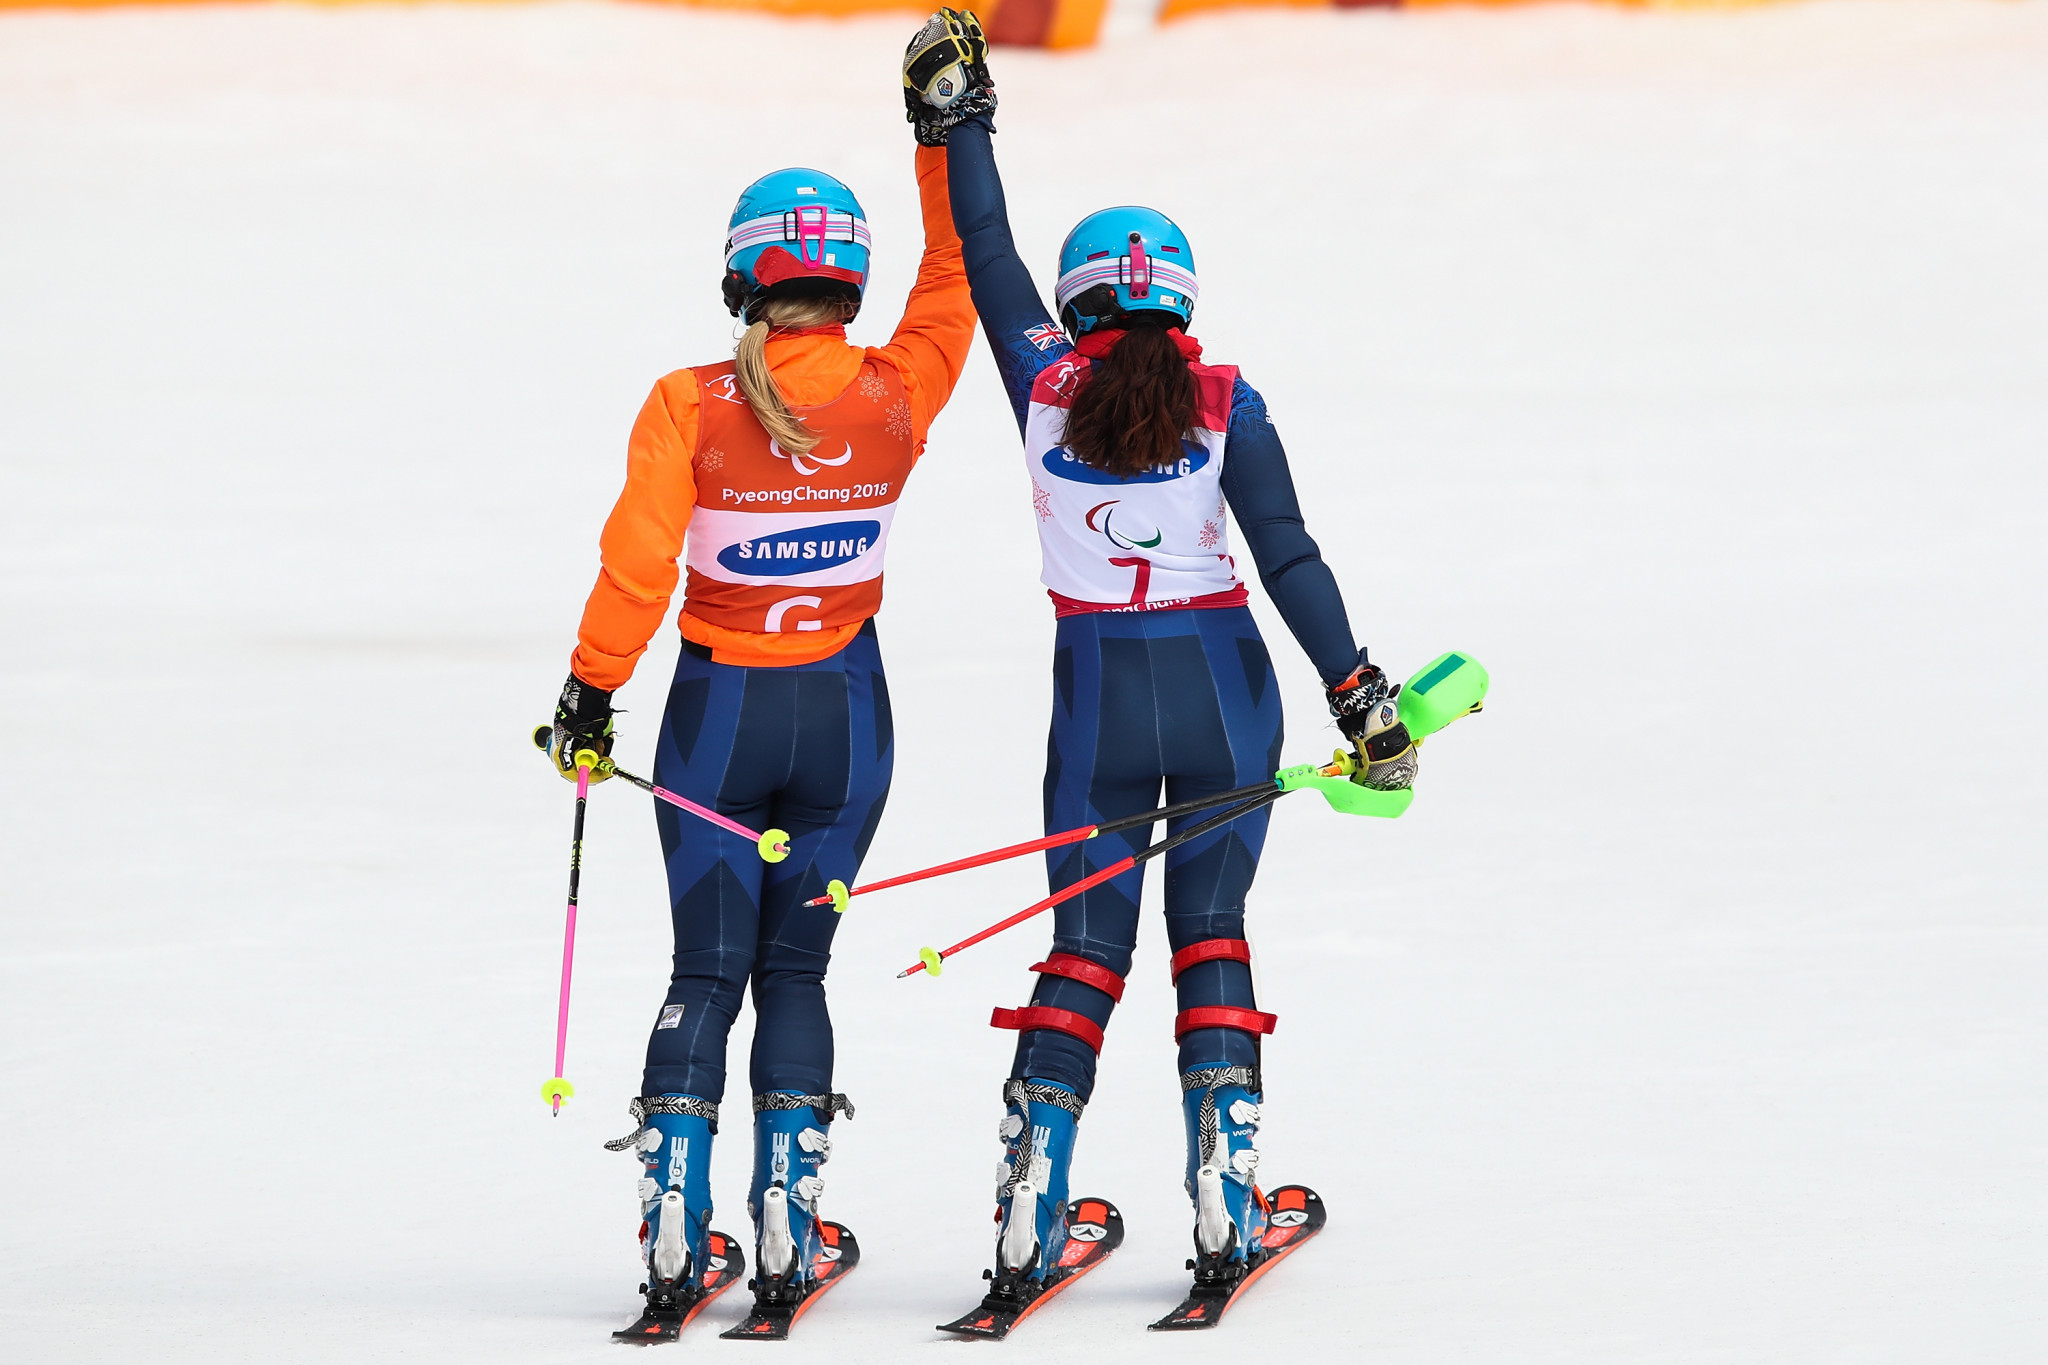 Britain's Menna Fitzpatrick and guide Jennifer Kehoe celebrate their victory in the women's visually impaired slalom at the Jeongseon Alpine Centre ©Getty Images